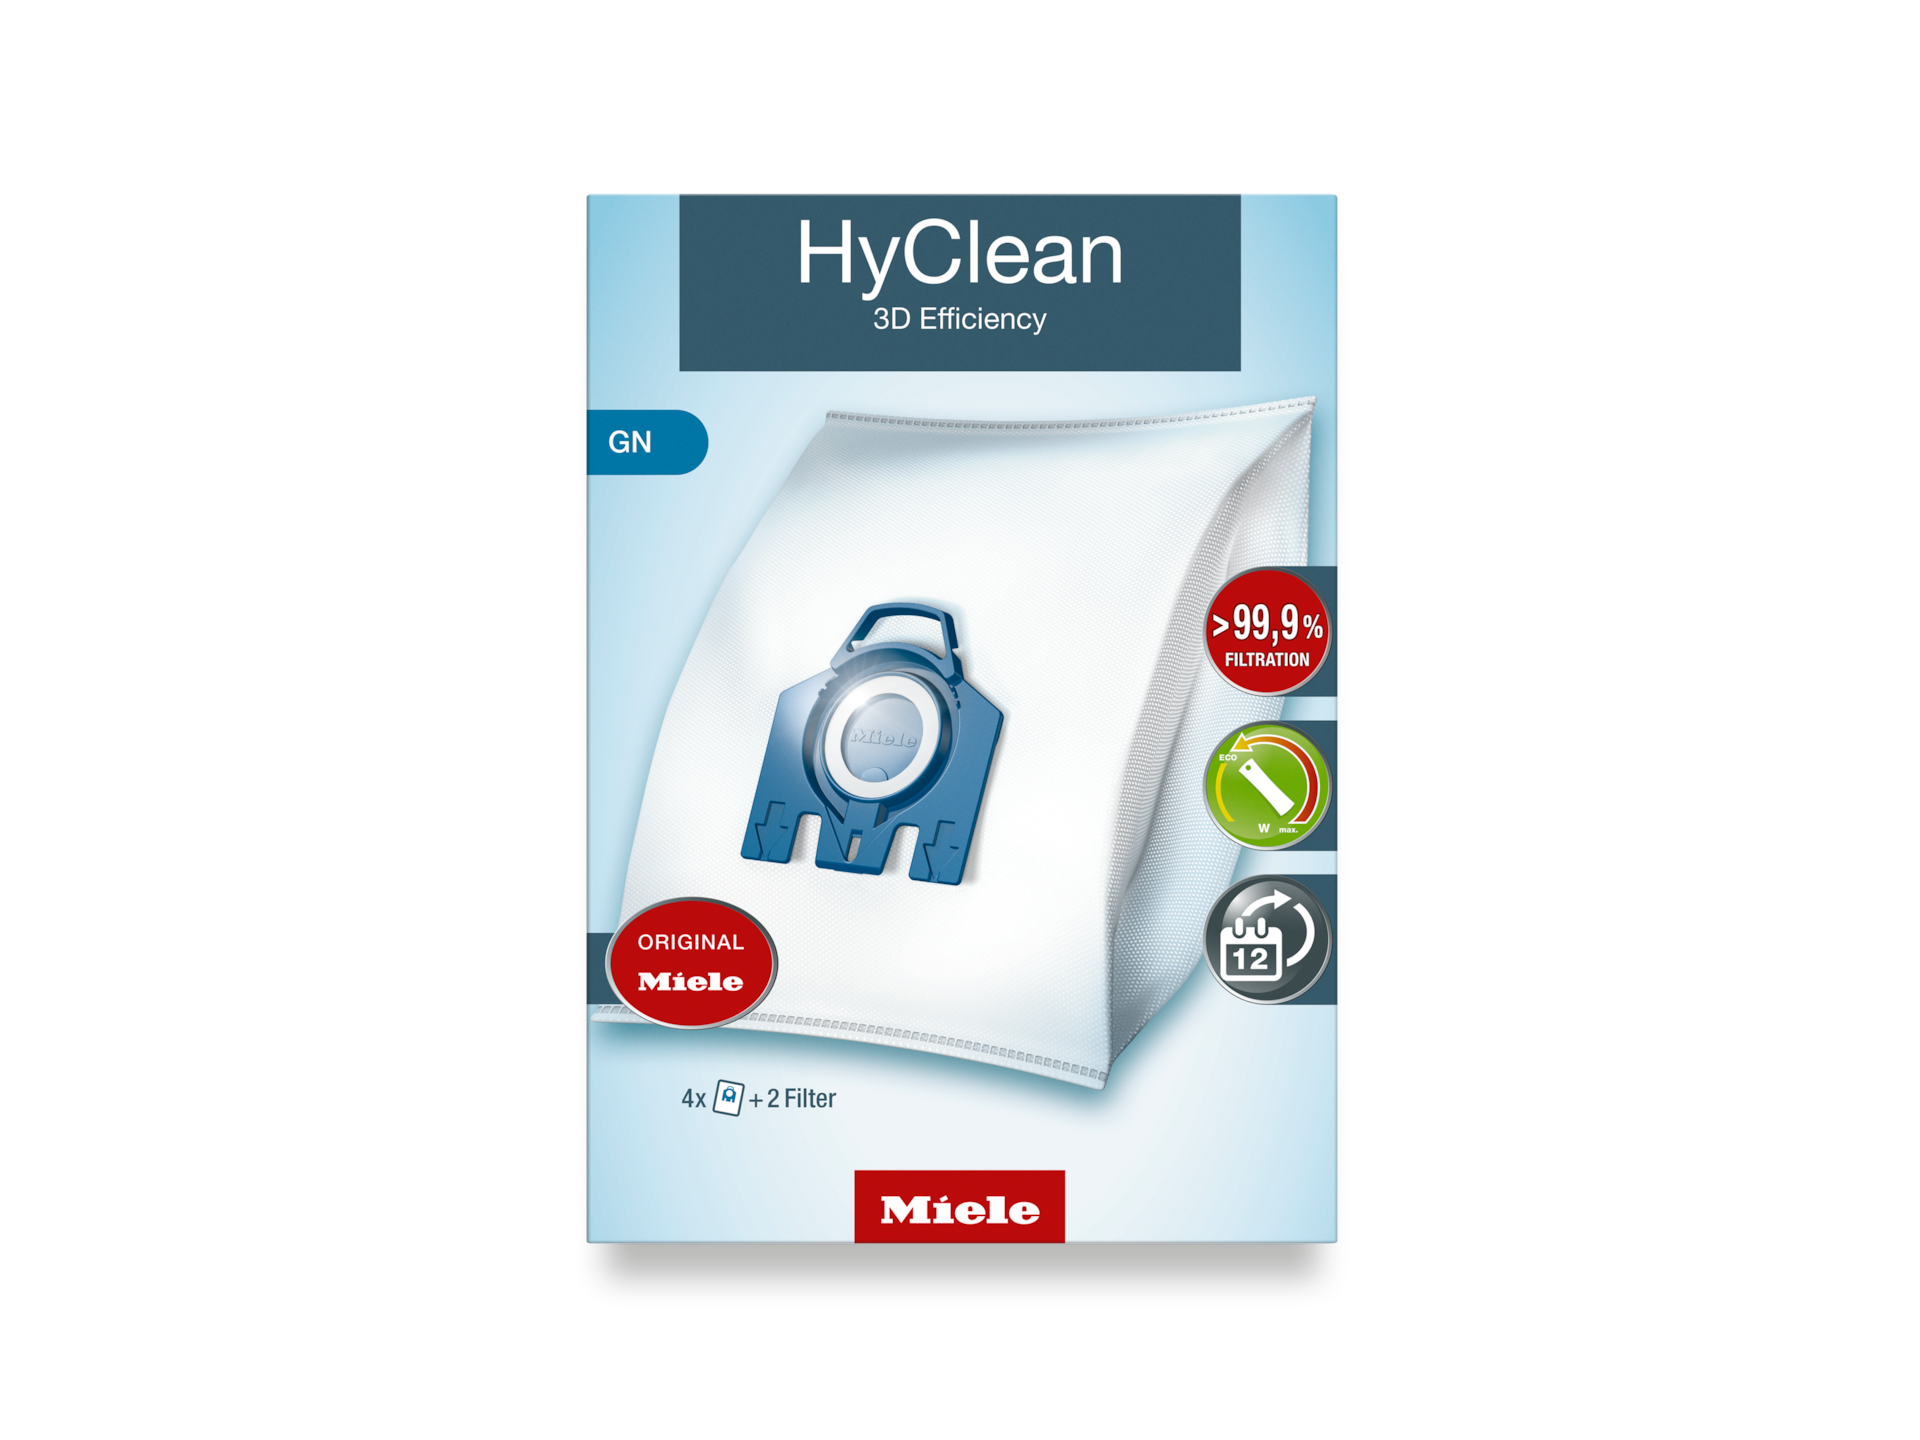 Accessories/Consumables (A&C) - GN HyClean 3D - 1